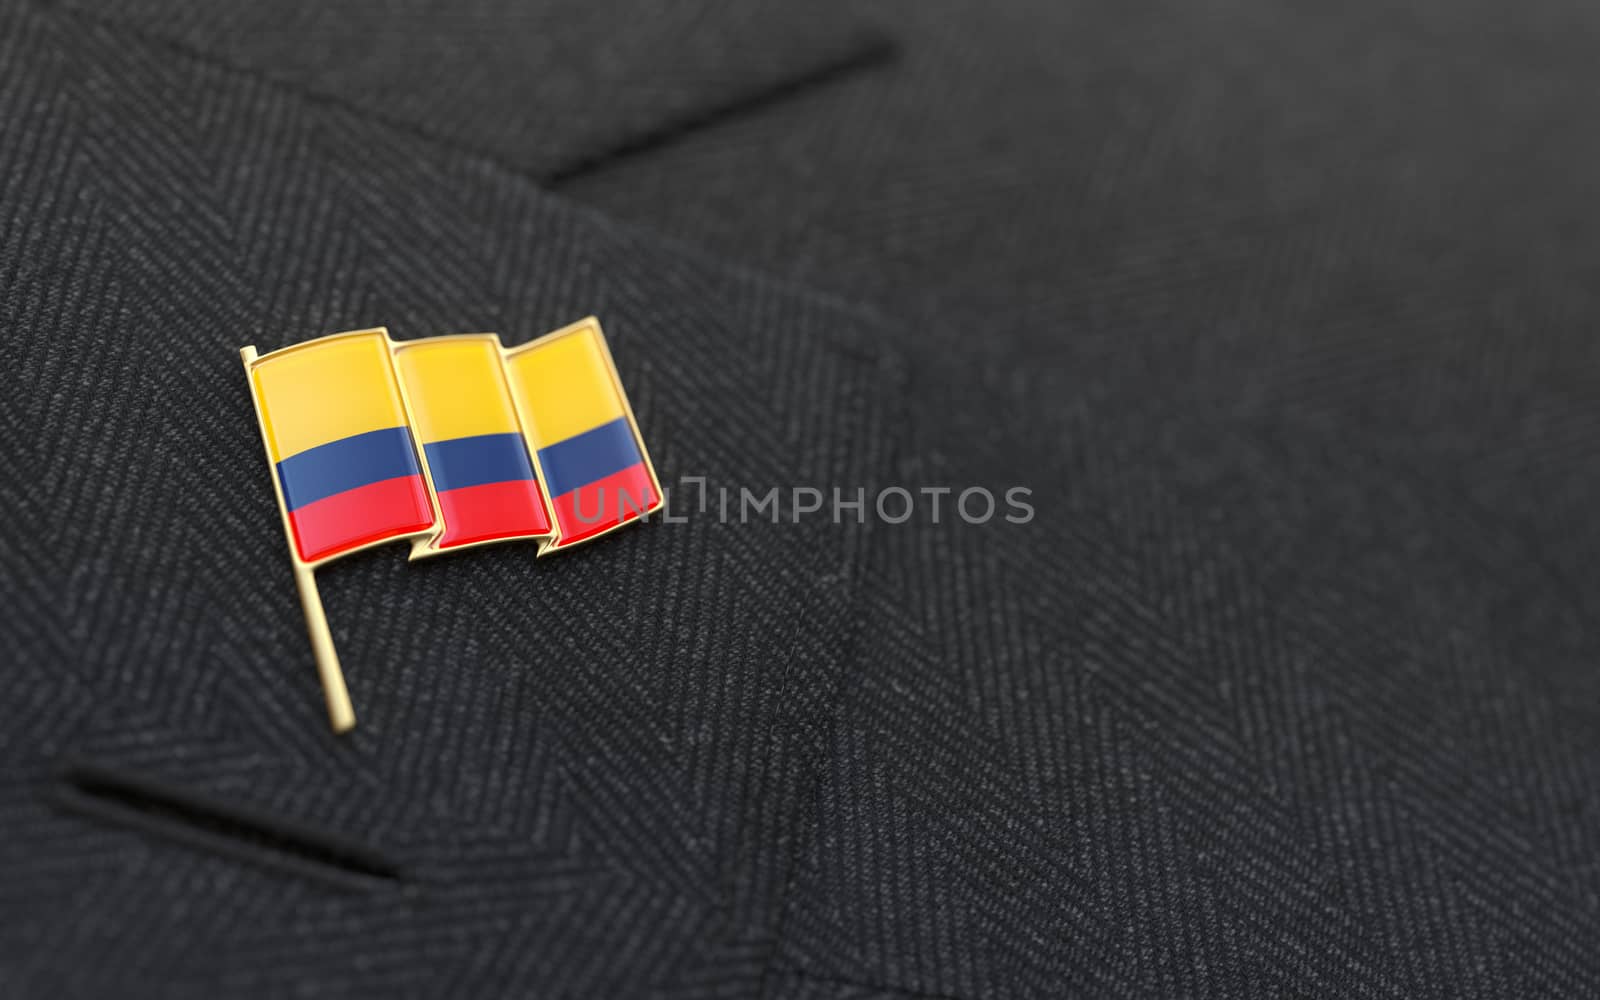 Colombia flag lapel pin on the collar of a business suit jacket shows patriotism